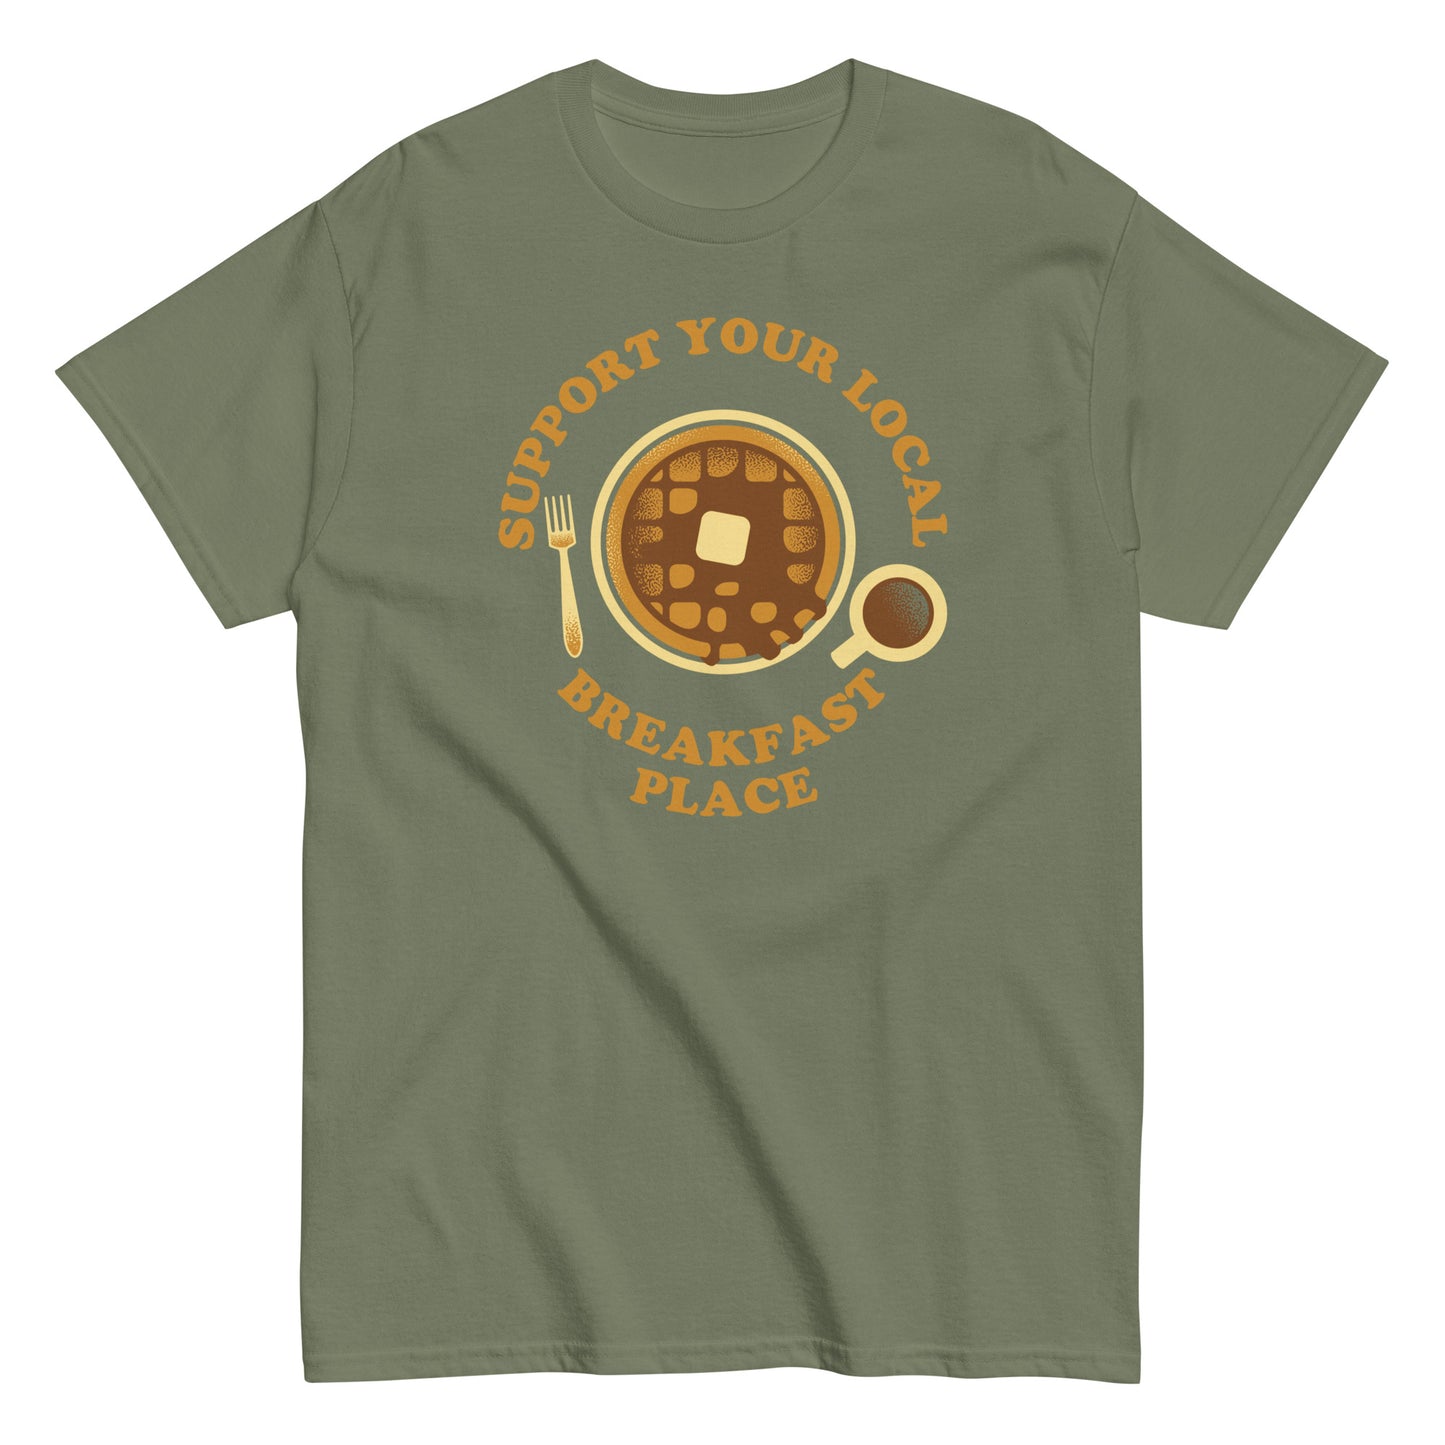 Support Your Local Breakfast Place Men's Classic Tee